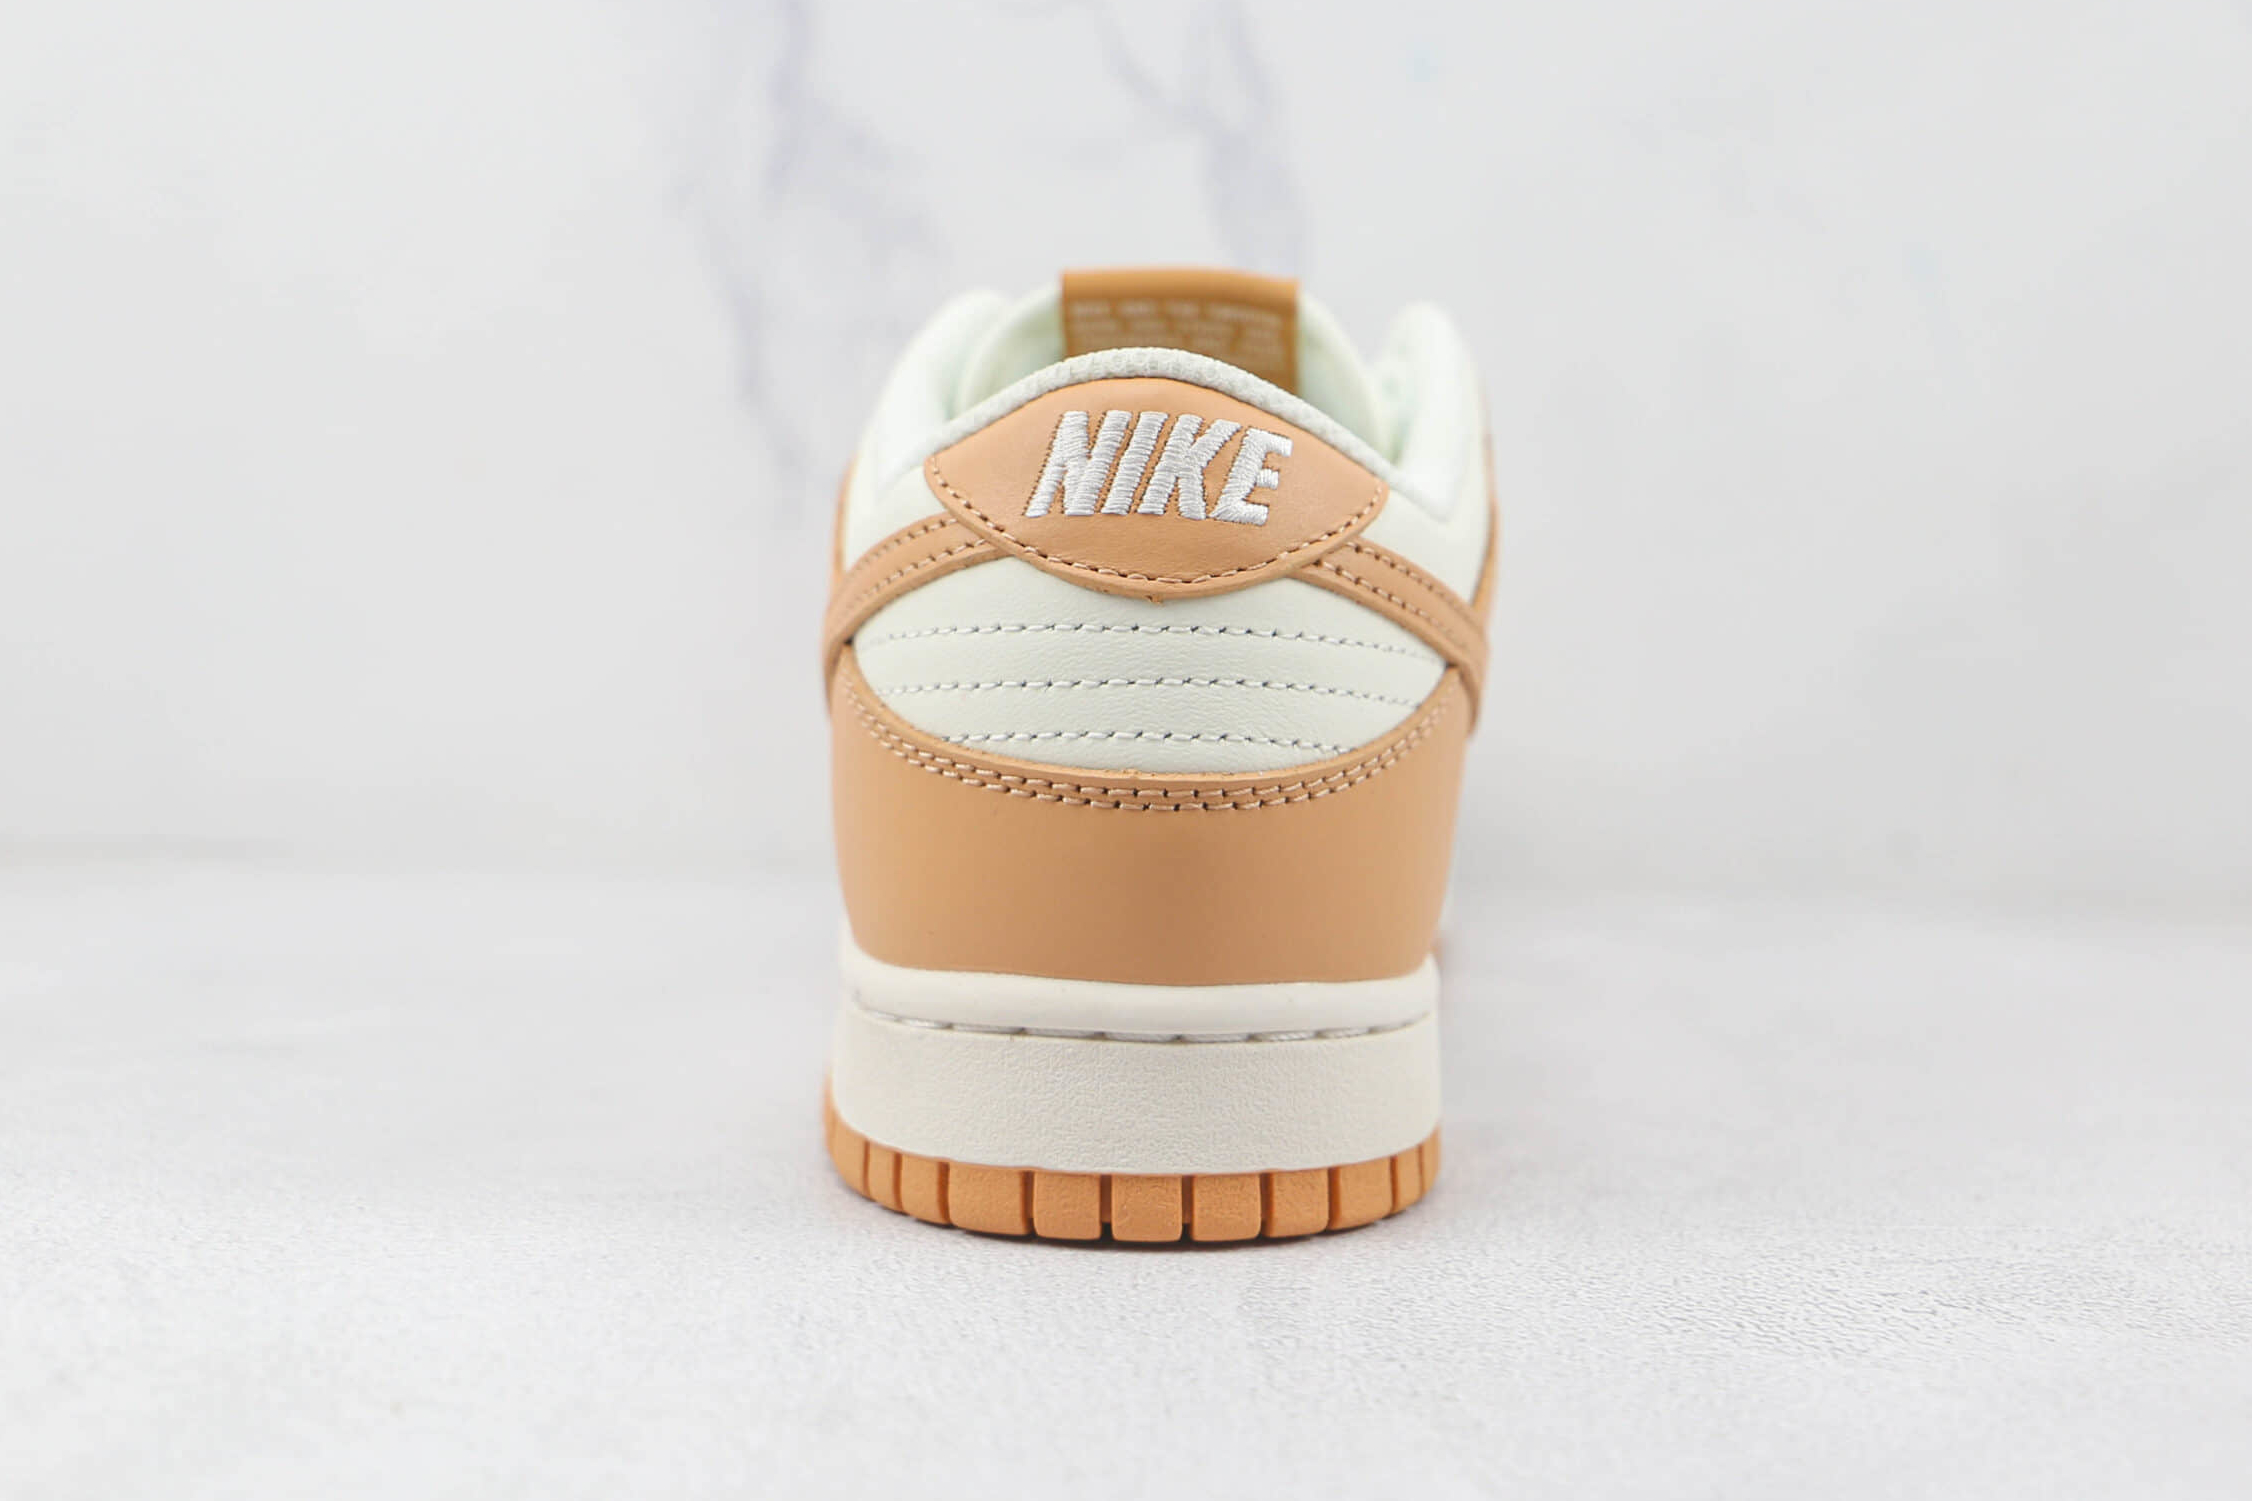 Nike Dunk Low 'Harvest Moon' DD1503-114 - Shop the Latest Nike Dunk Releases Now!